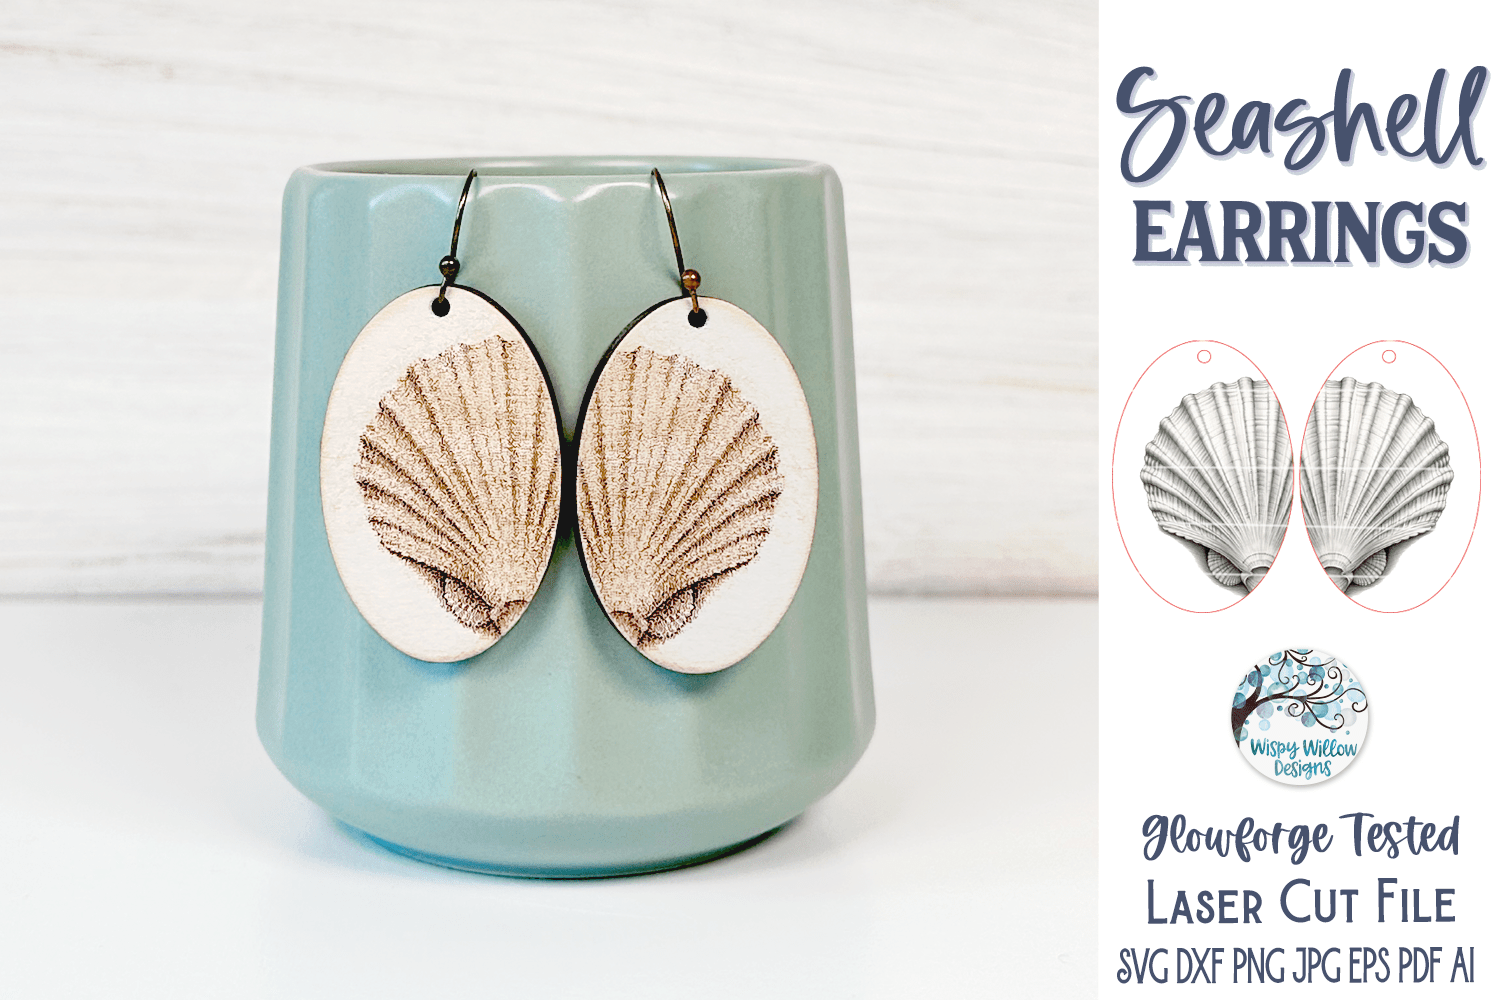 Seashell Earring File for Glowforge or Laser Cutter Wispy Willow Designs Company